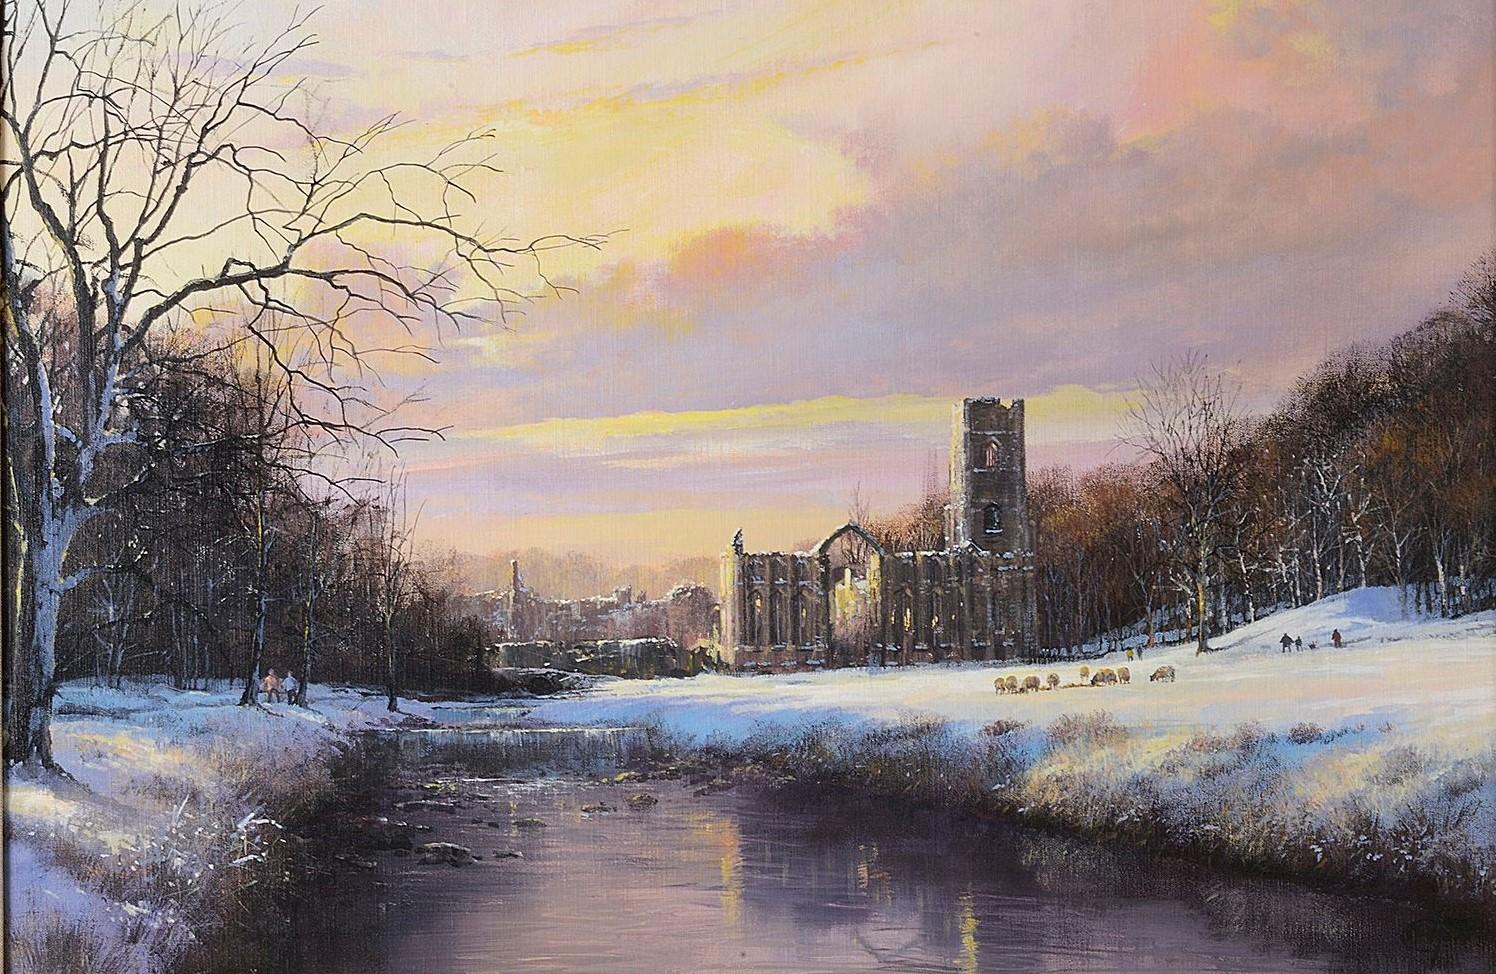  Fountains Abbey yorkshire winter oil scene clive madgwick - English School Painting by Clive Madgwick